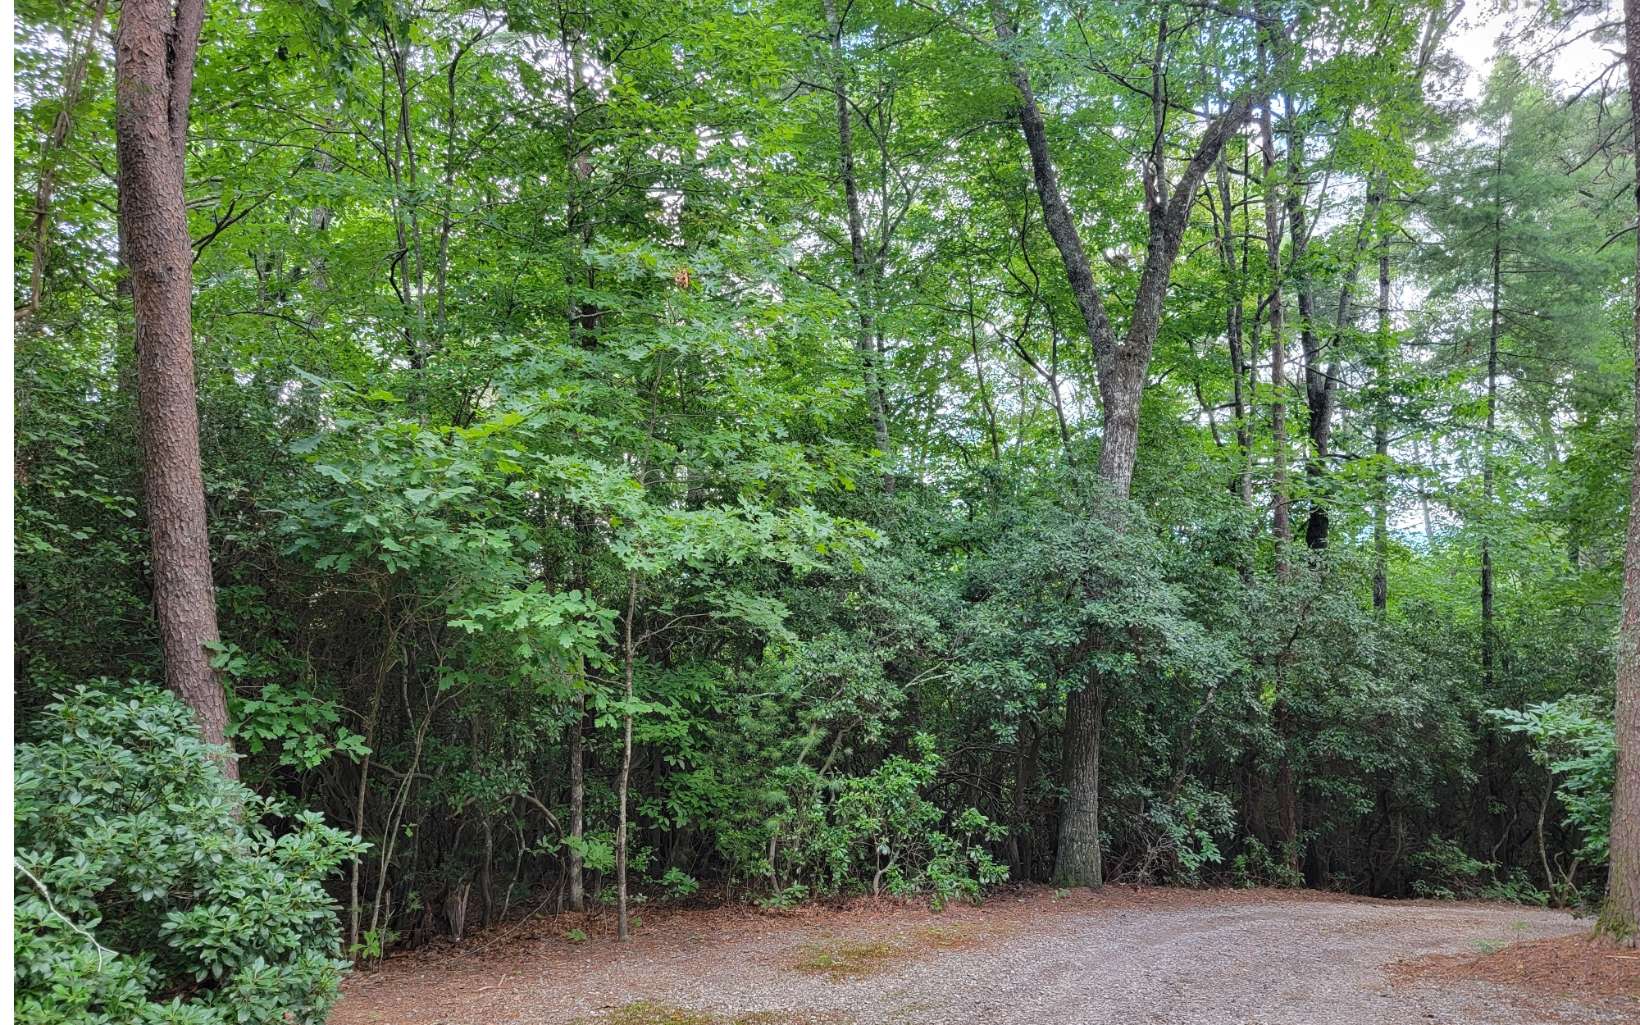 Desirable, private 2.18 acre lot in the established of Mountain Lakes Development. Wooded with mature stand of mostly hardwoods, Mountain laurel and rhododendron abound on this property that has one of more potential homesites. Seasonal views can likely be opened up to expose year-round mountain views. Nearby are Vogel State Park, Helton Creek Falls, Brasstown Bald and the Appalachian Trail. Bring your dreams of a secluded mountain getaway. Just 8 miles from Blairsville.